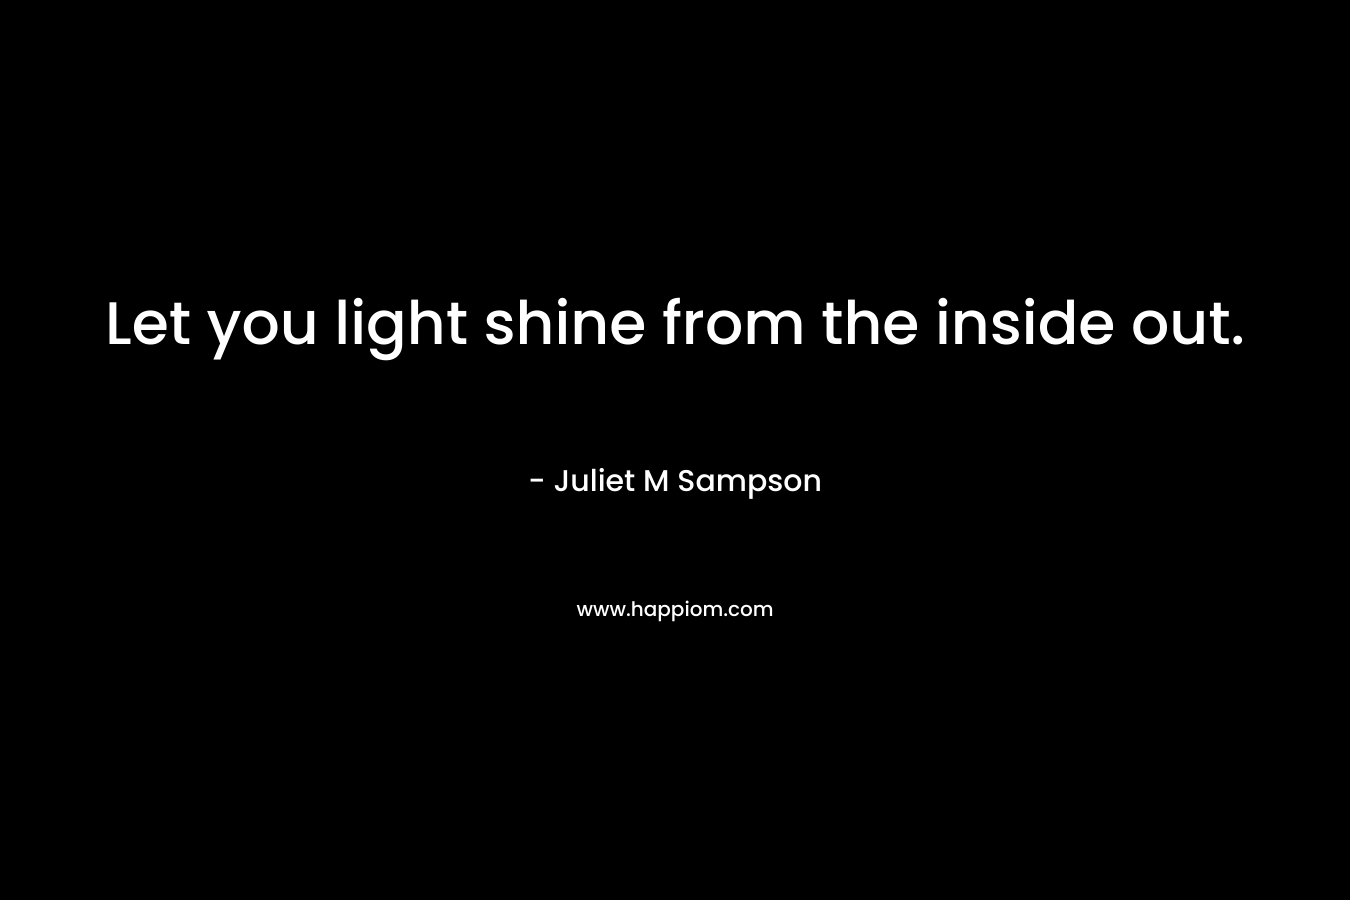 Let you light shine from the inside out.